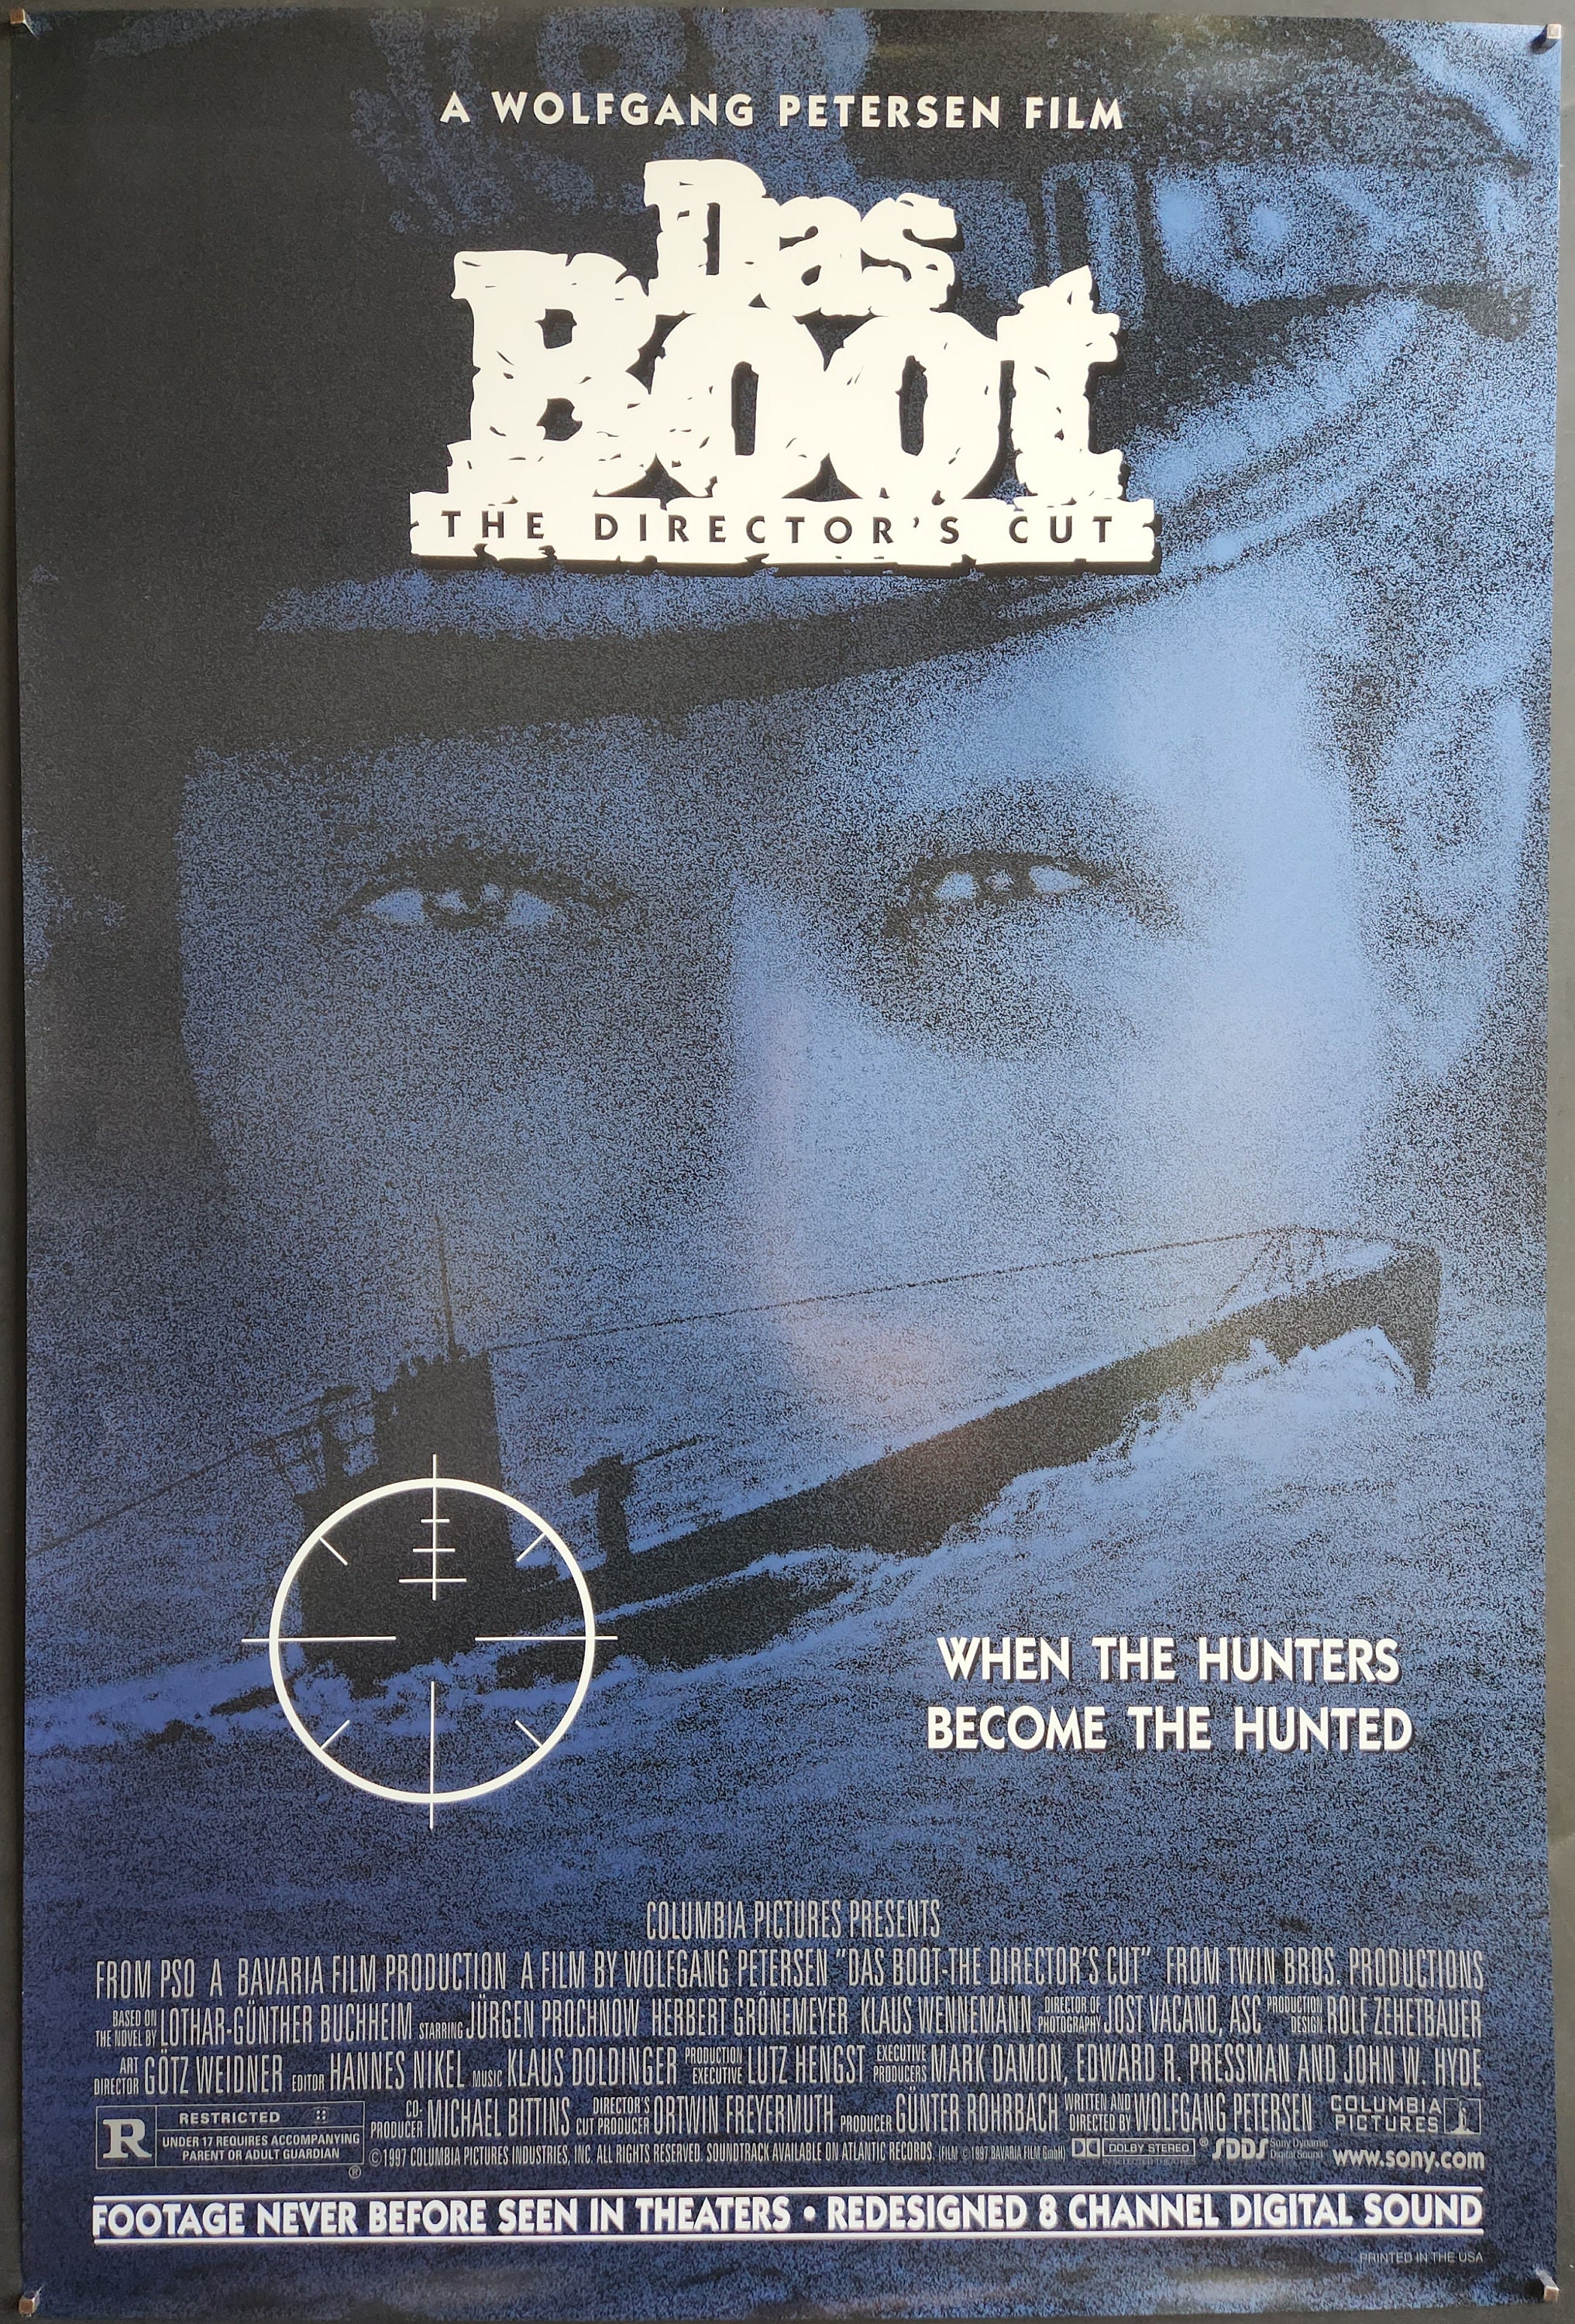 Das Boot-an Original Vintage Movie Poster for Wolfgang Petersen's Story of  German Wolf Pack Submariners With Jürgen Prochnow and Erwin Leder -   Sweden